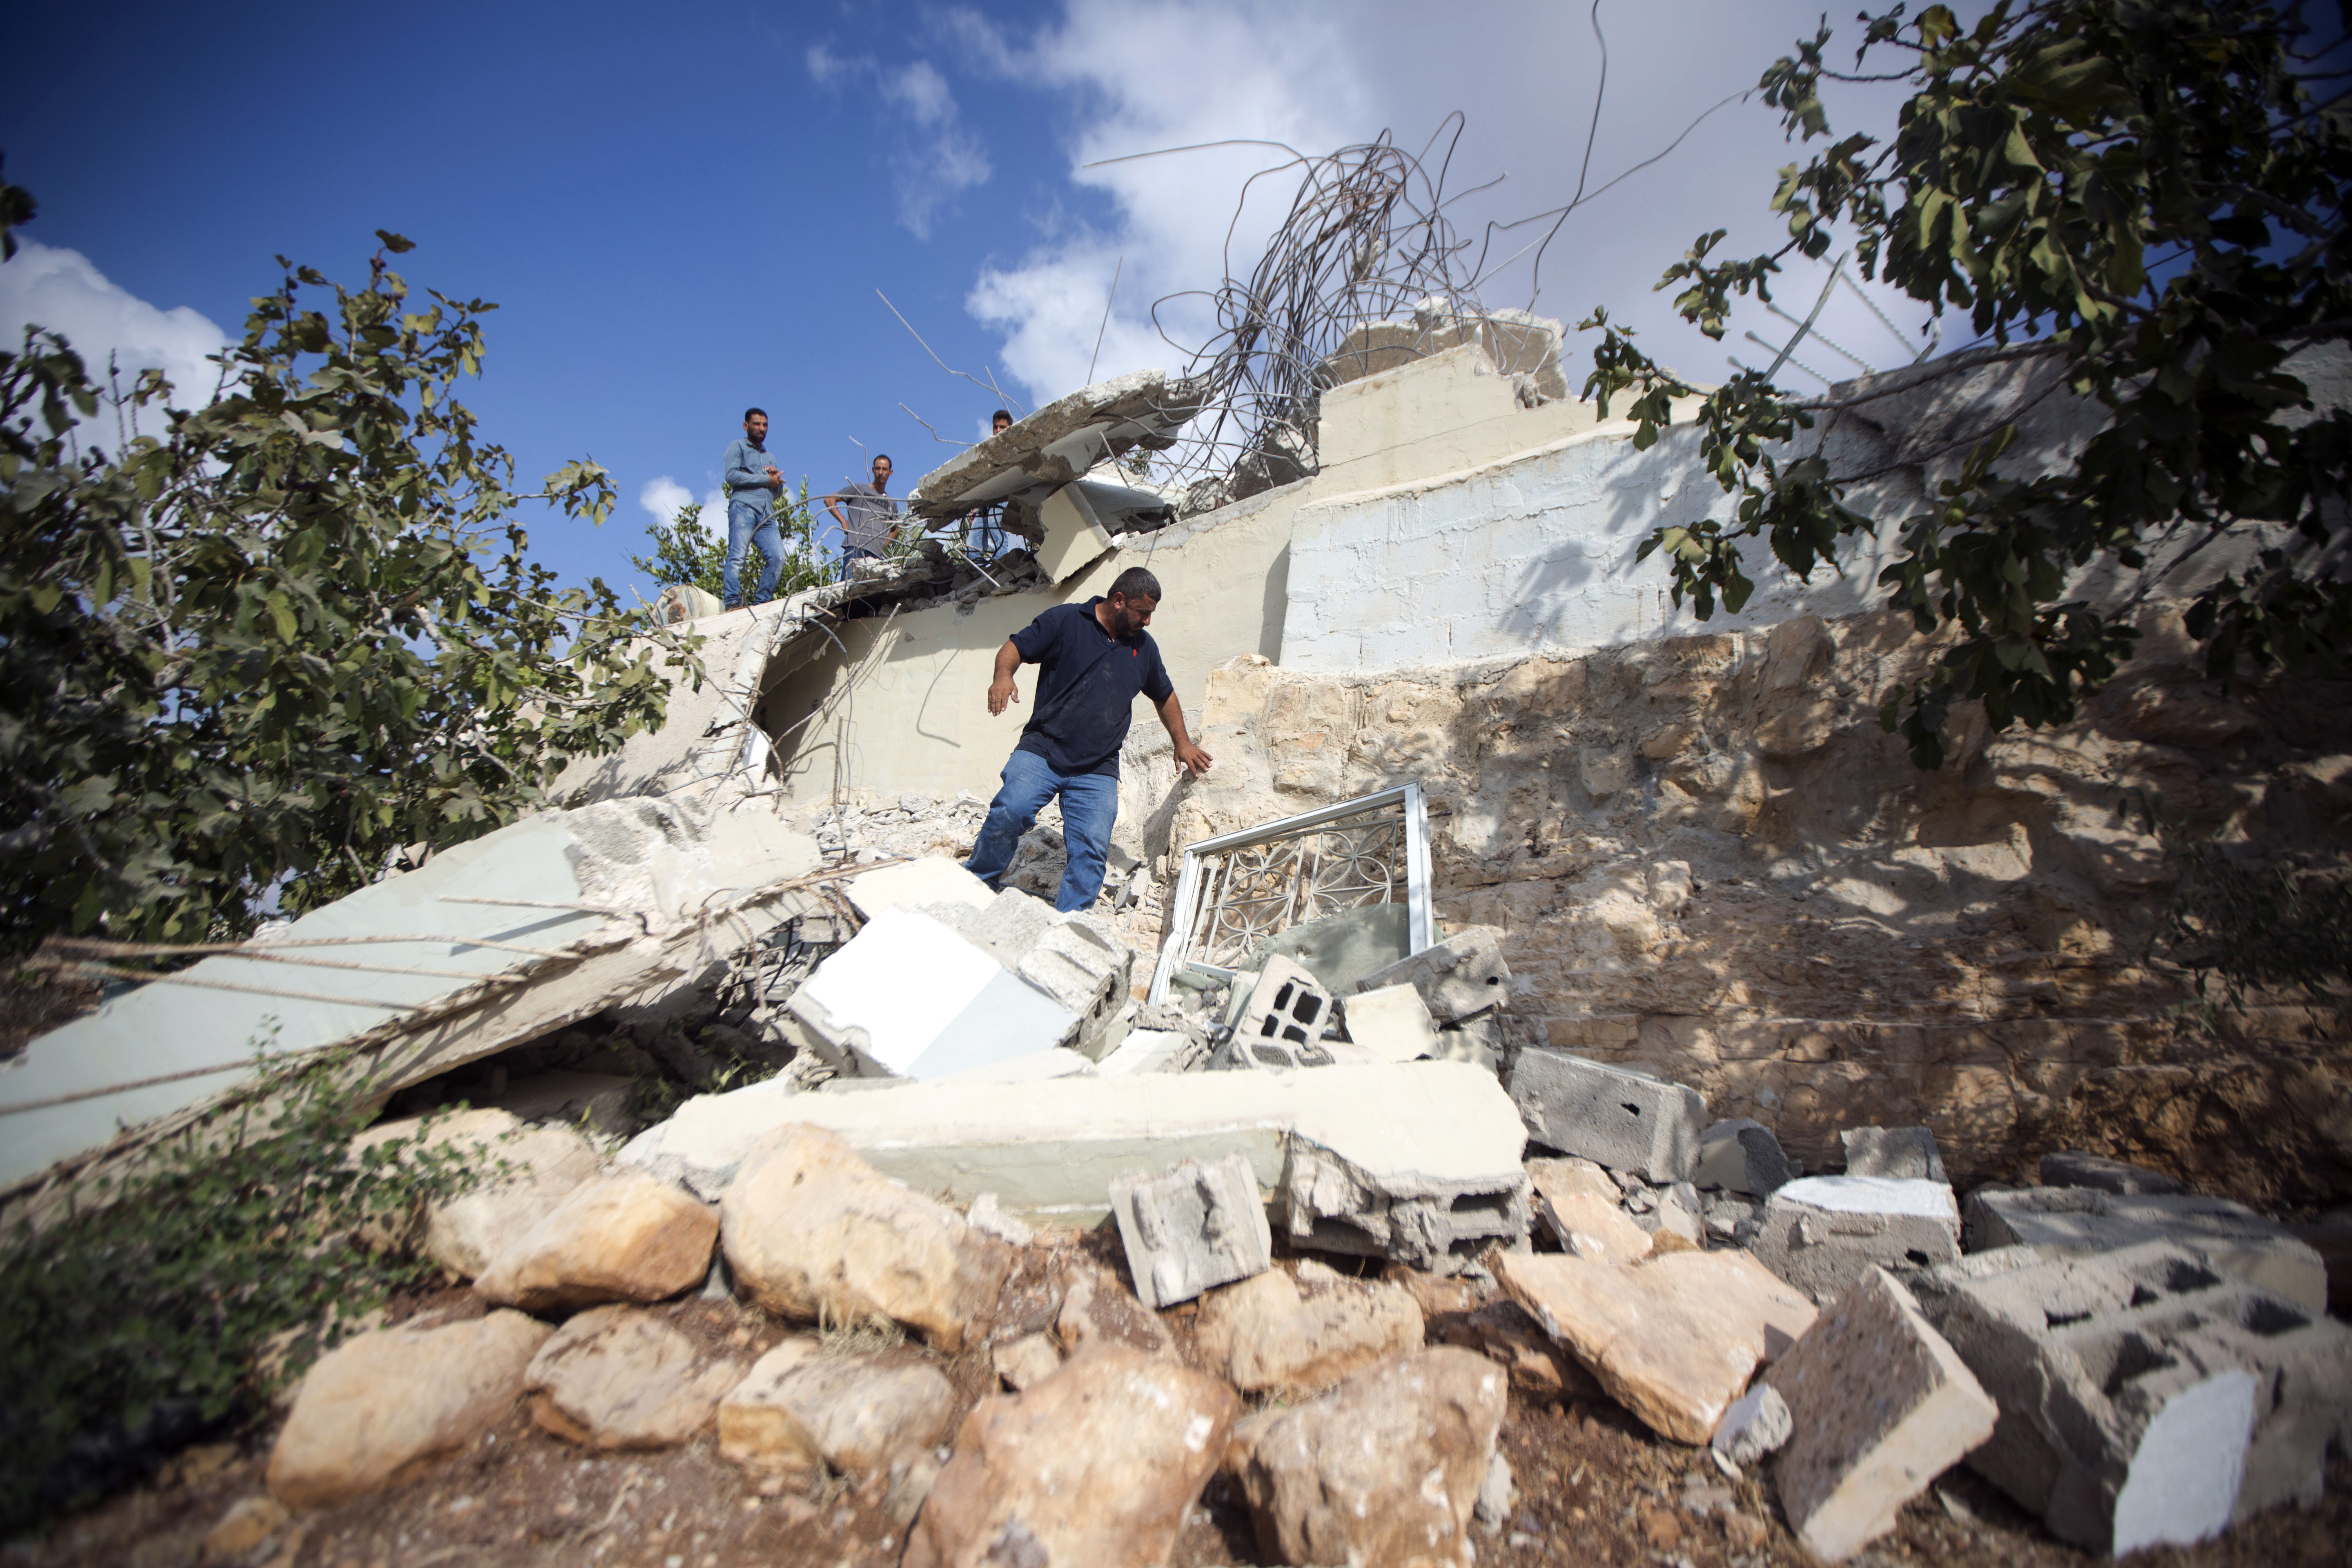 A Palestinian man inspects the house of Muhammad Dar Yusuf after it was demolished by Israeli army, in the West Bank village of Kauber near City of Ramallah, Tuesday, Aug. 28, 2018. The Israeli military says forces demolished the home of a Palestinian who killed an Israeli in a West Bank settlement last month. (AP Photo/Majdi Mohammed)